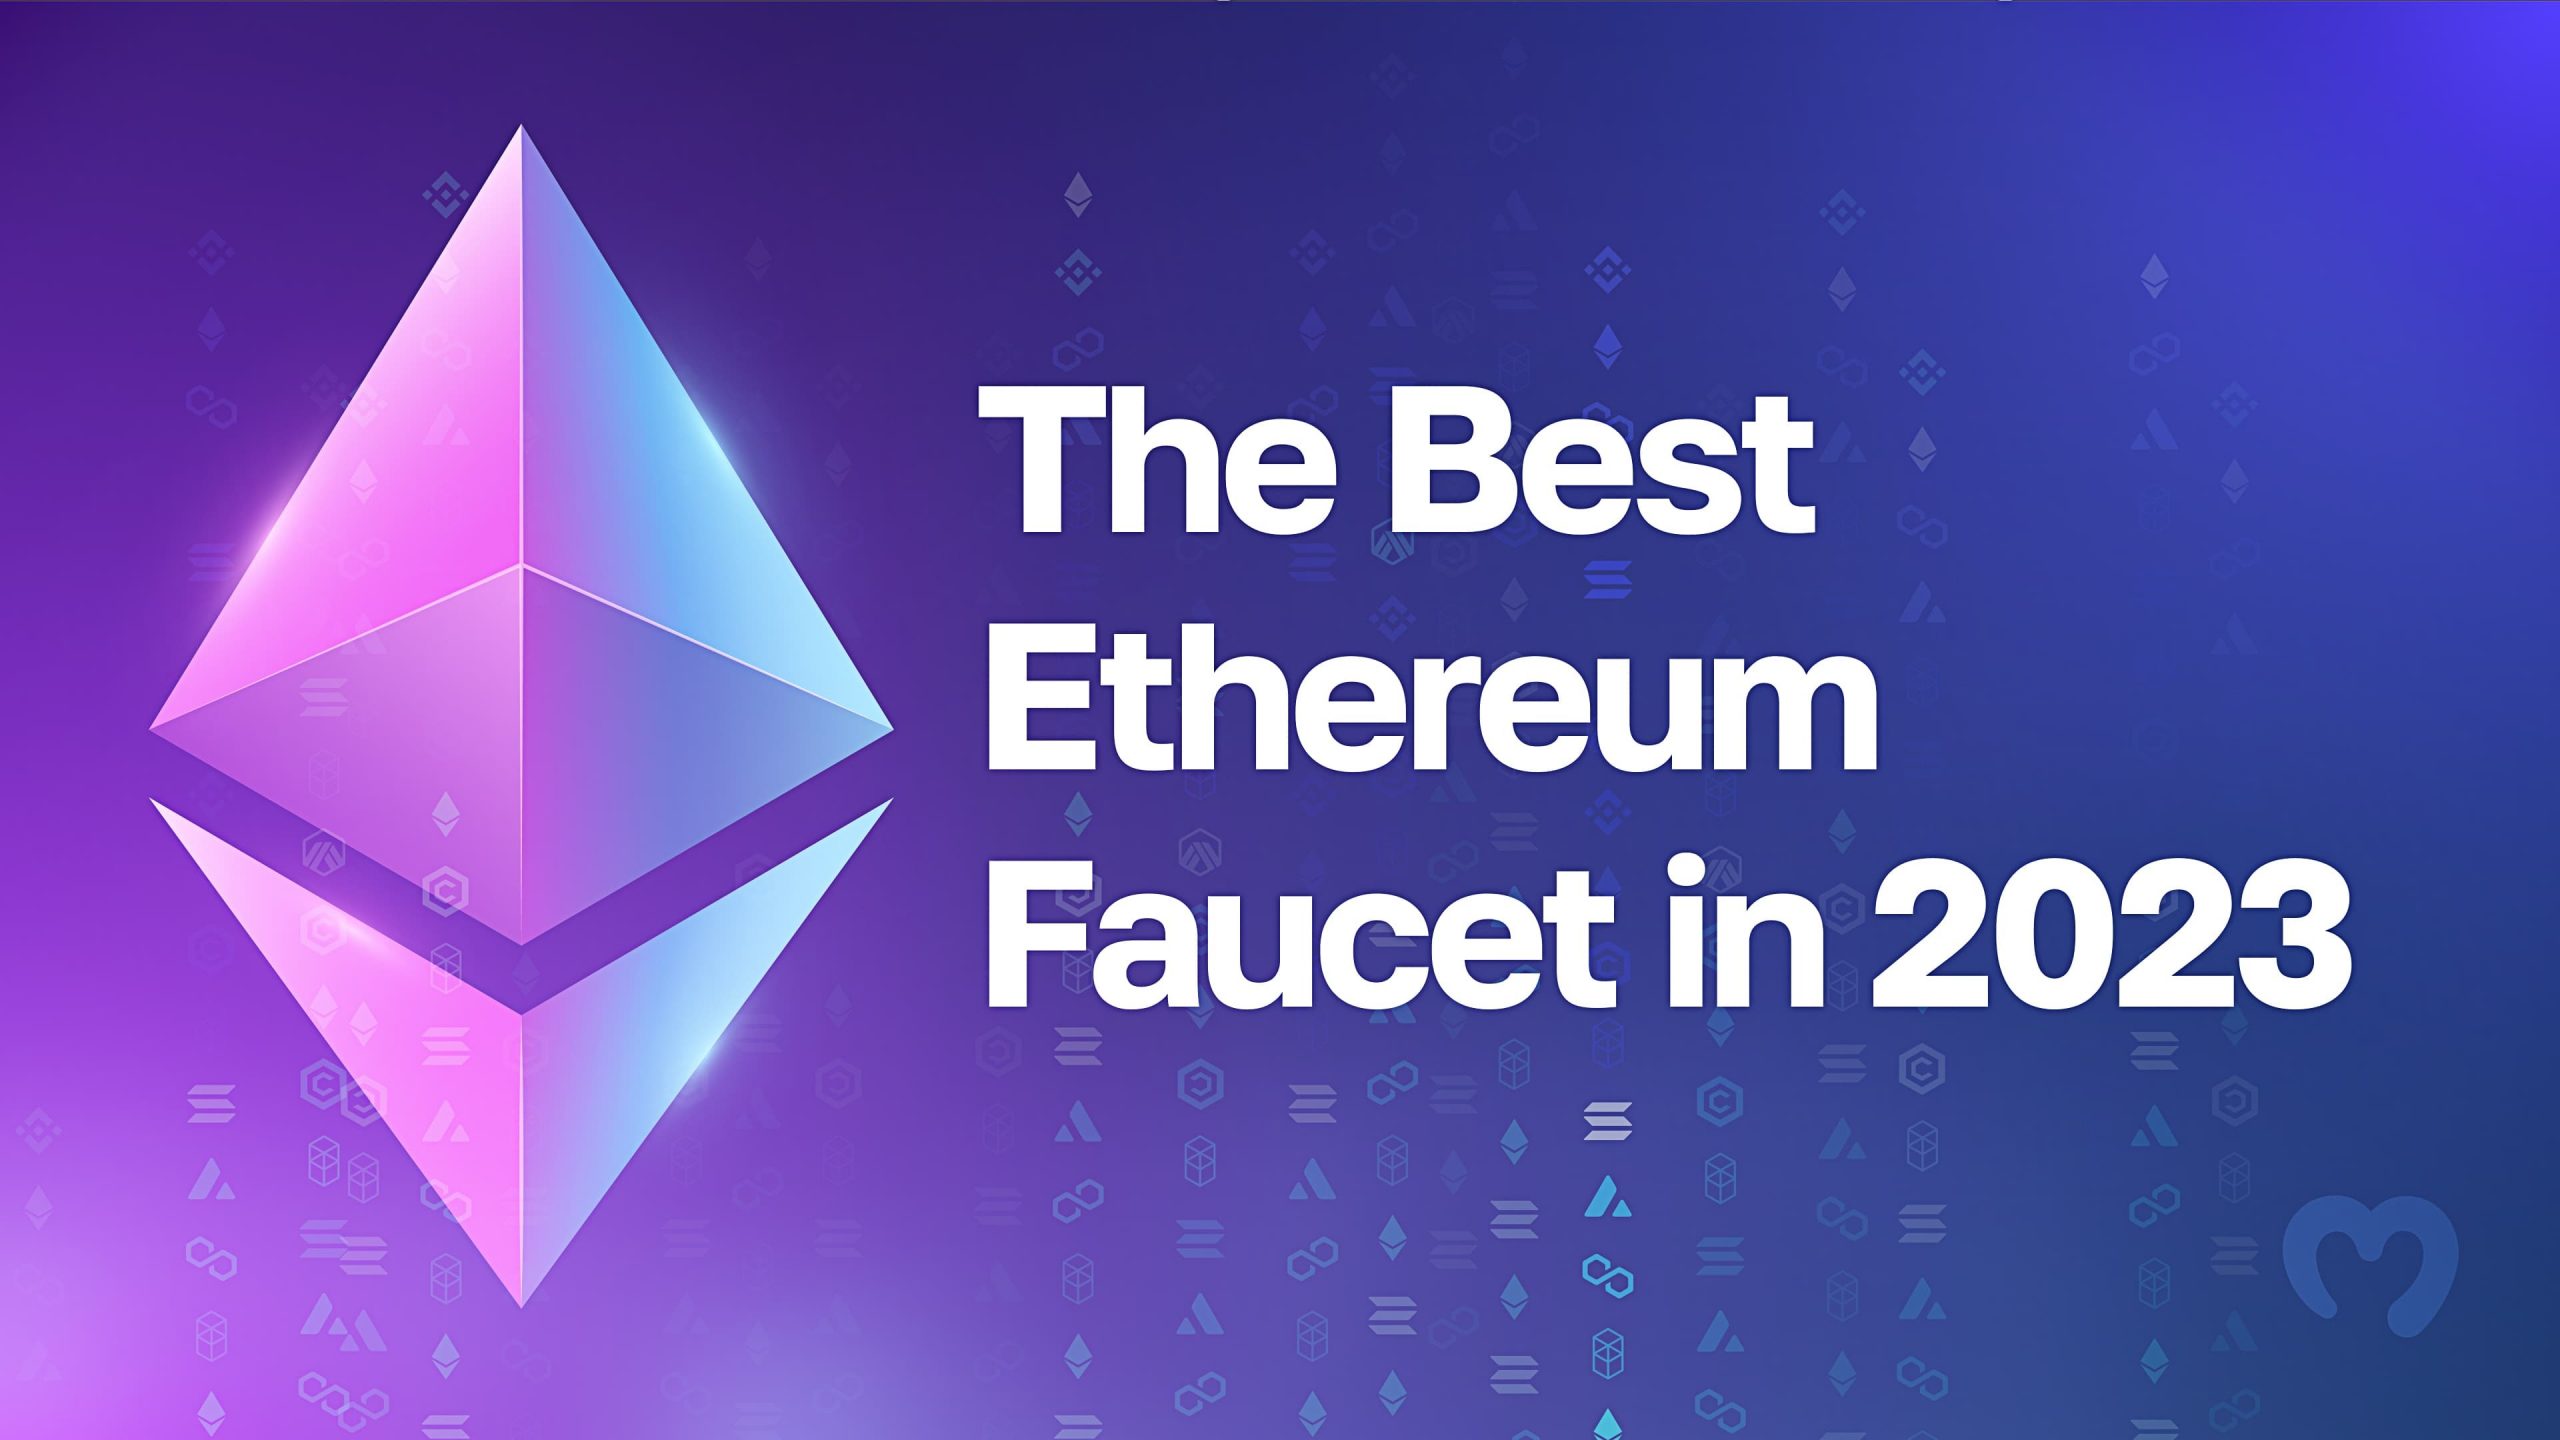 The Best Ethereum Faucet in 2023